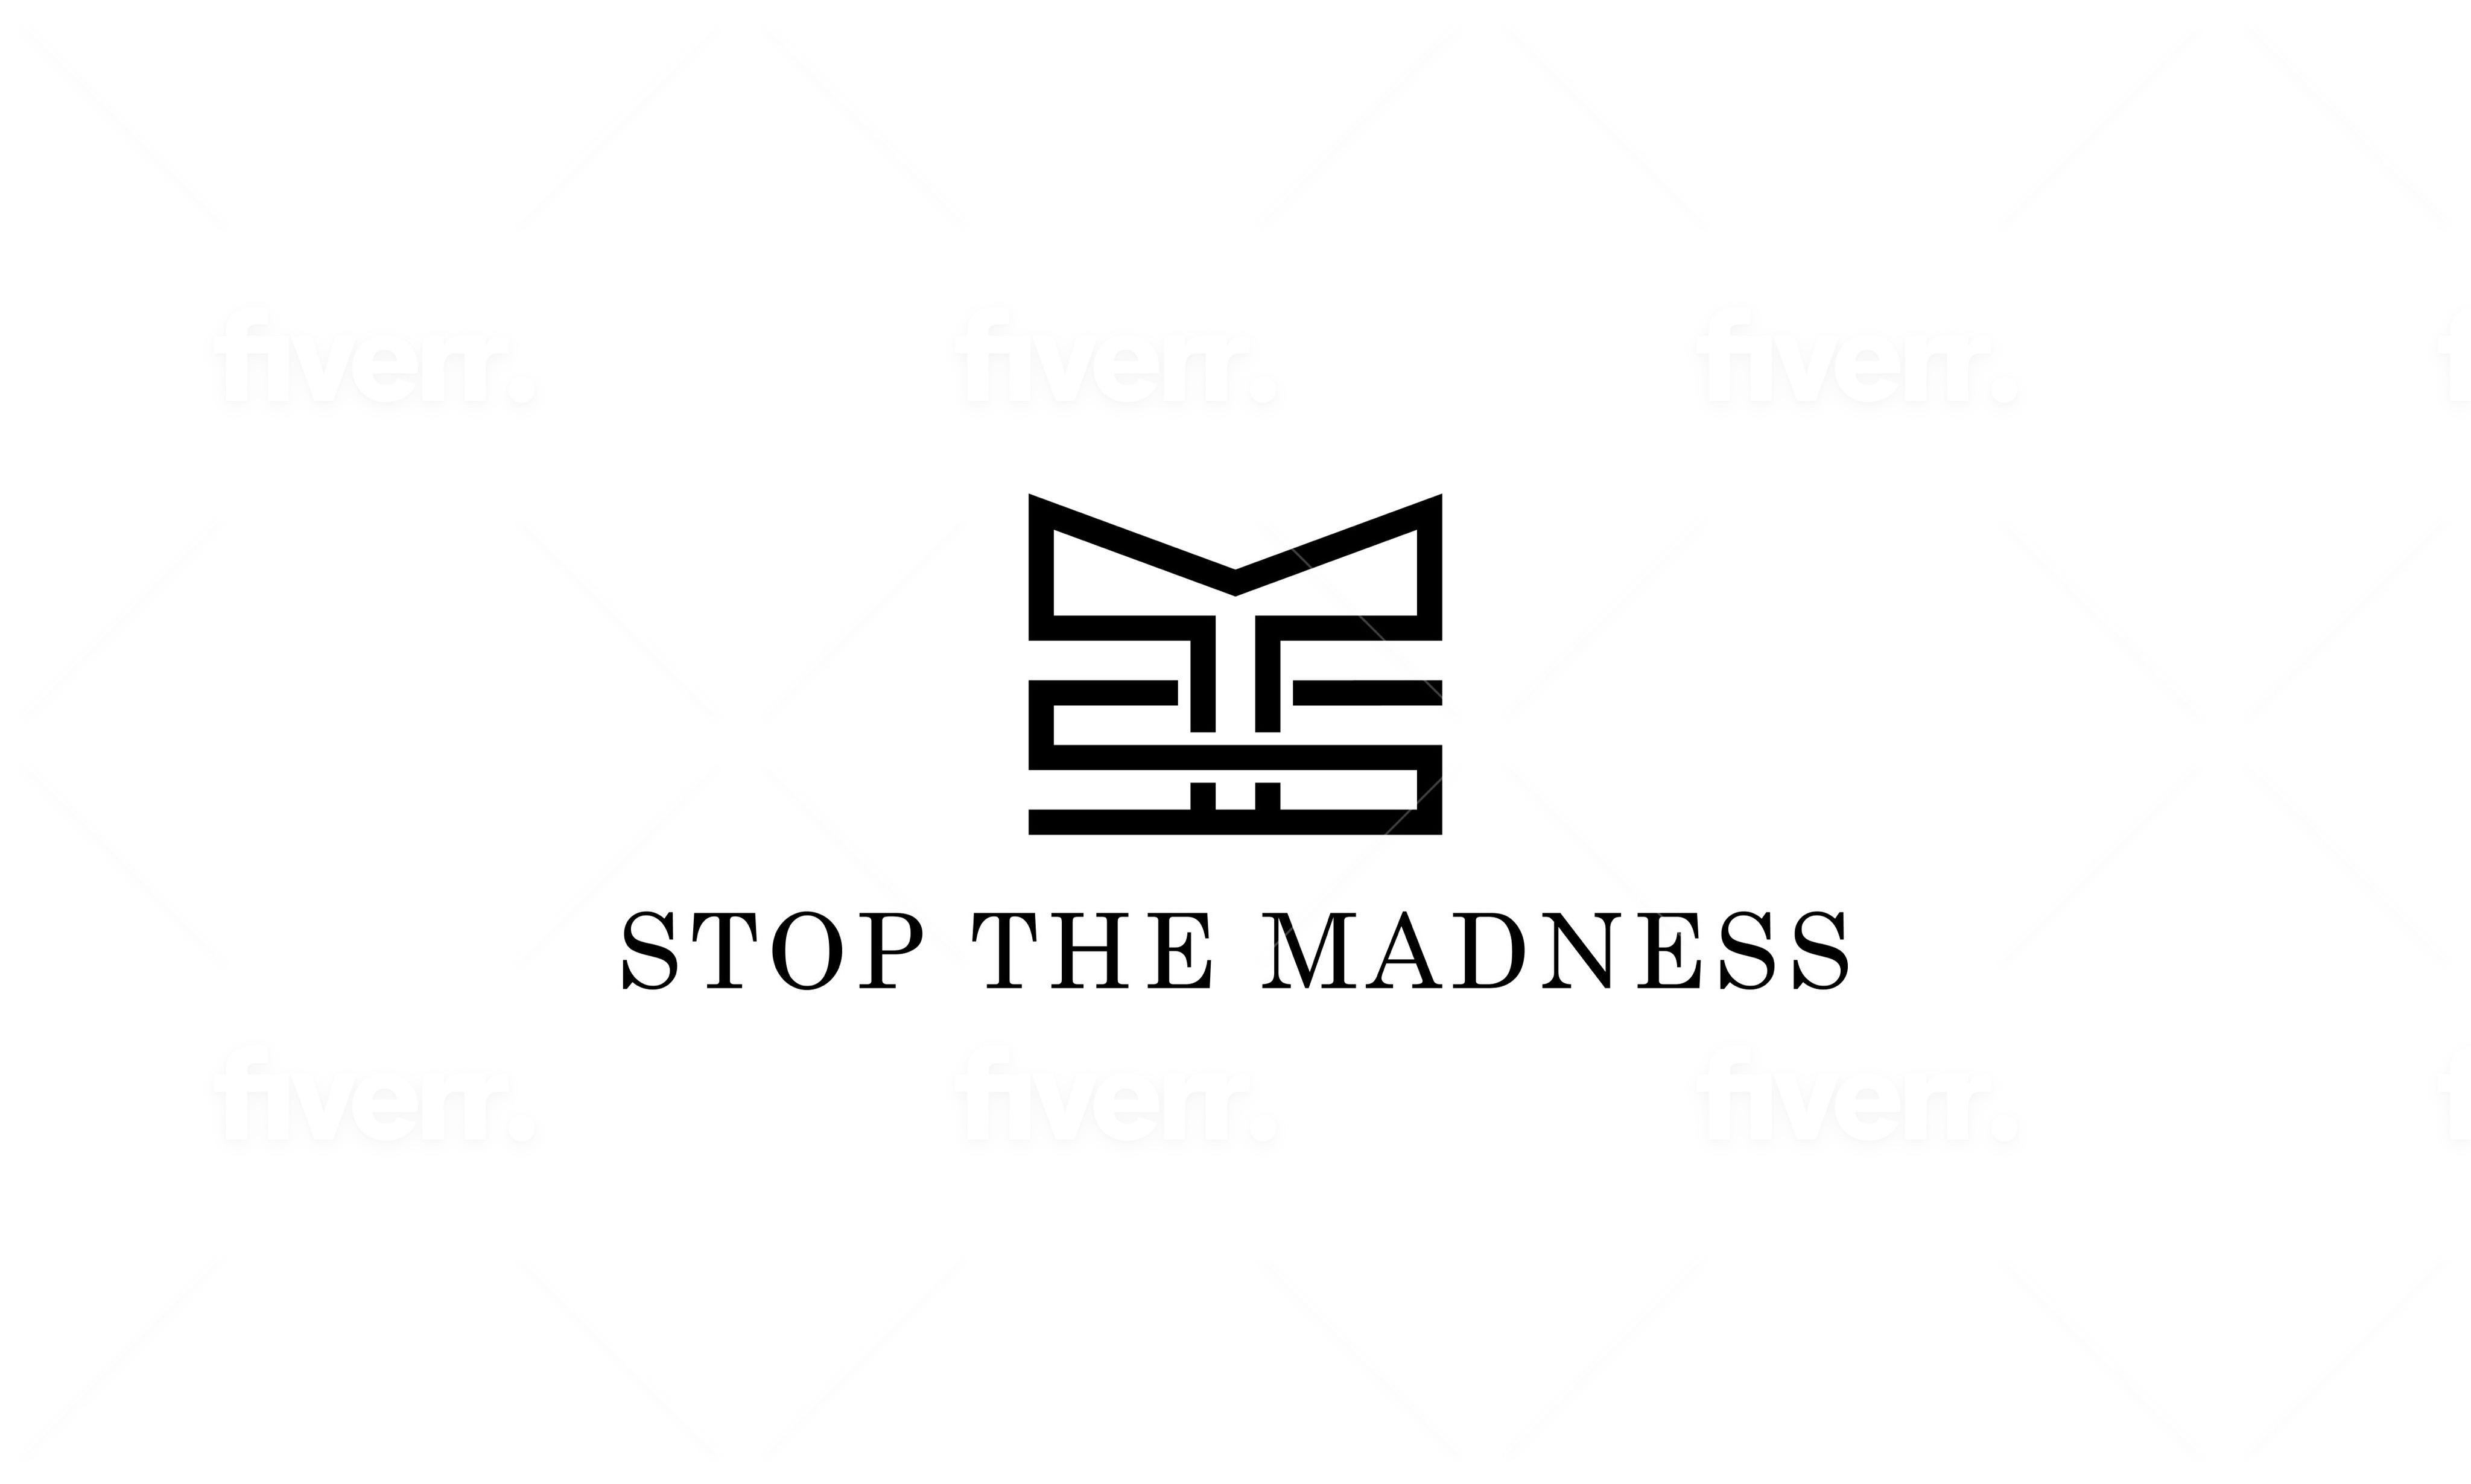  STM; STOP THE MADNESS